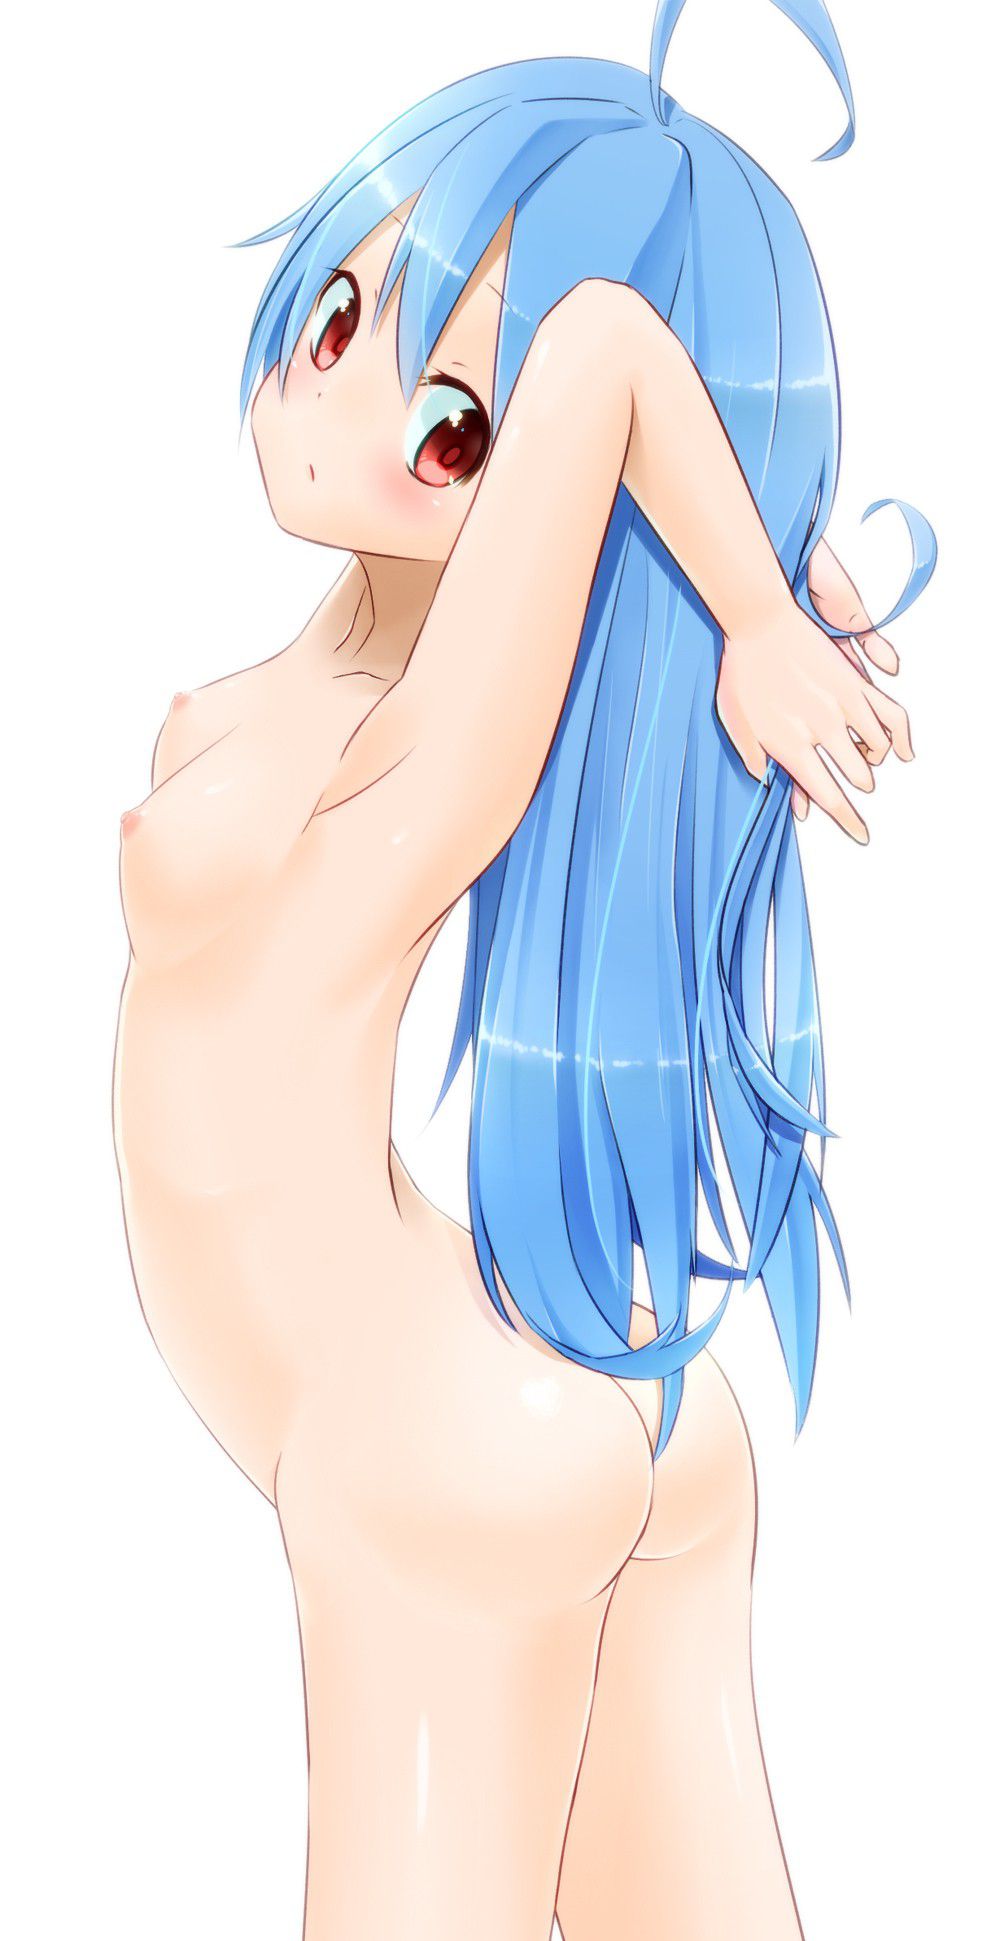 [2nd] Secondary erotic image of a girl with blue or light blue hair Part 7 [Blue hair] 19